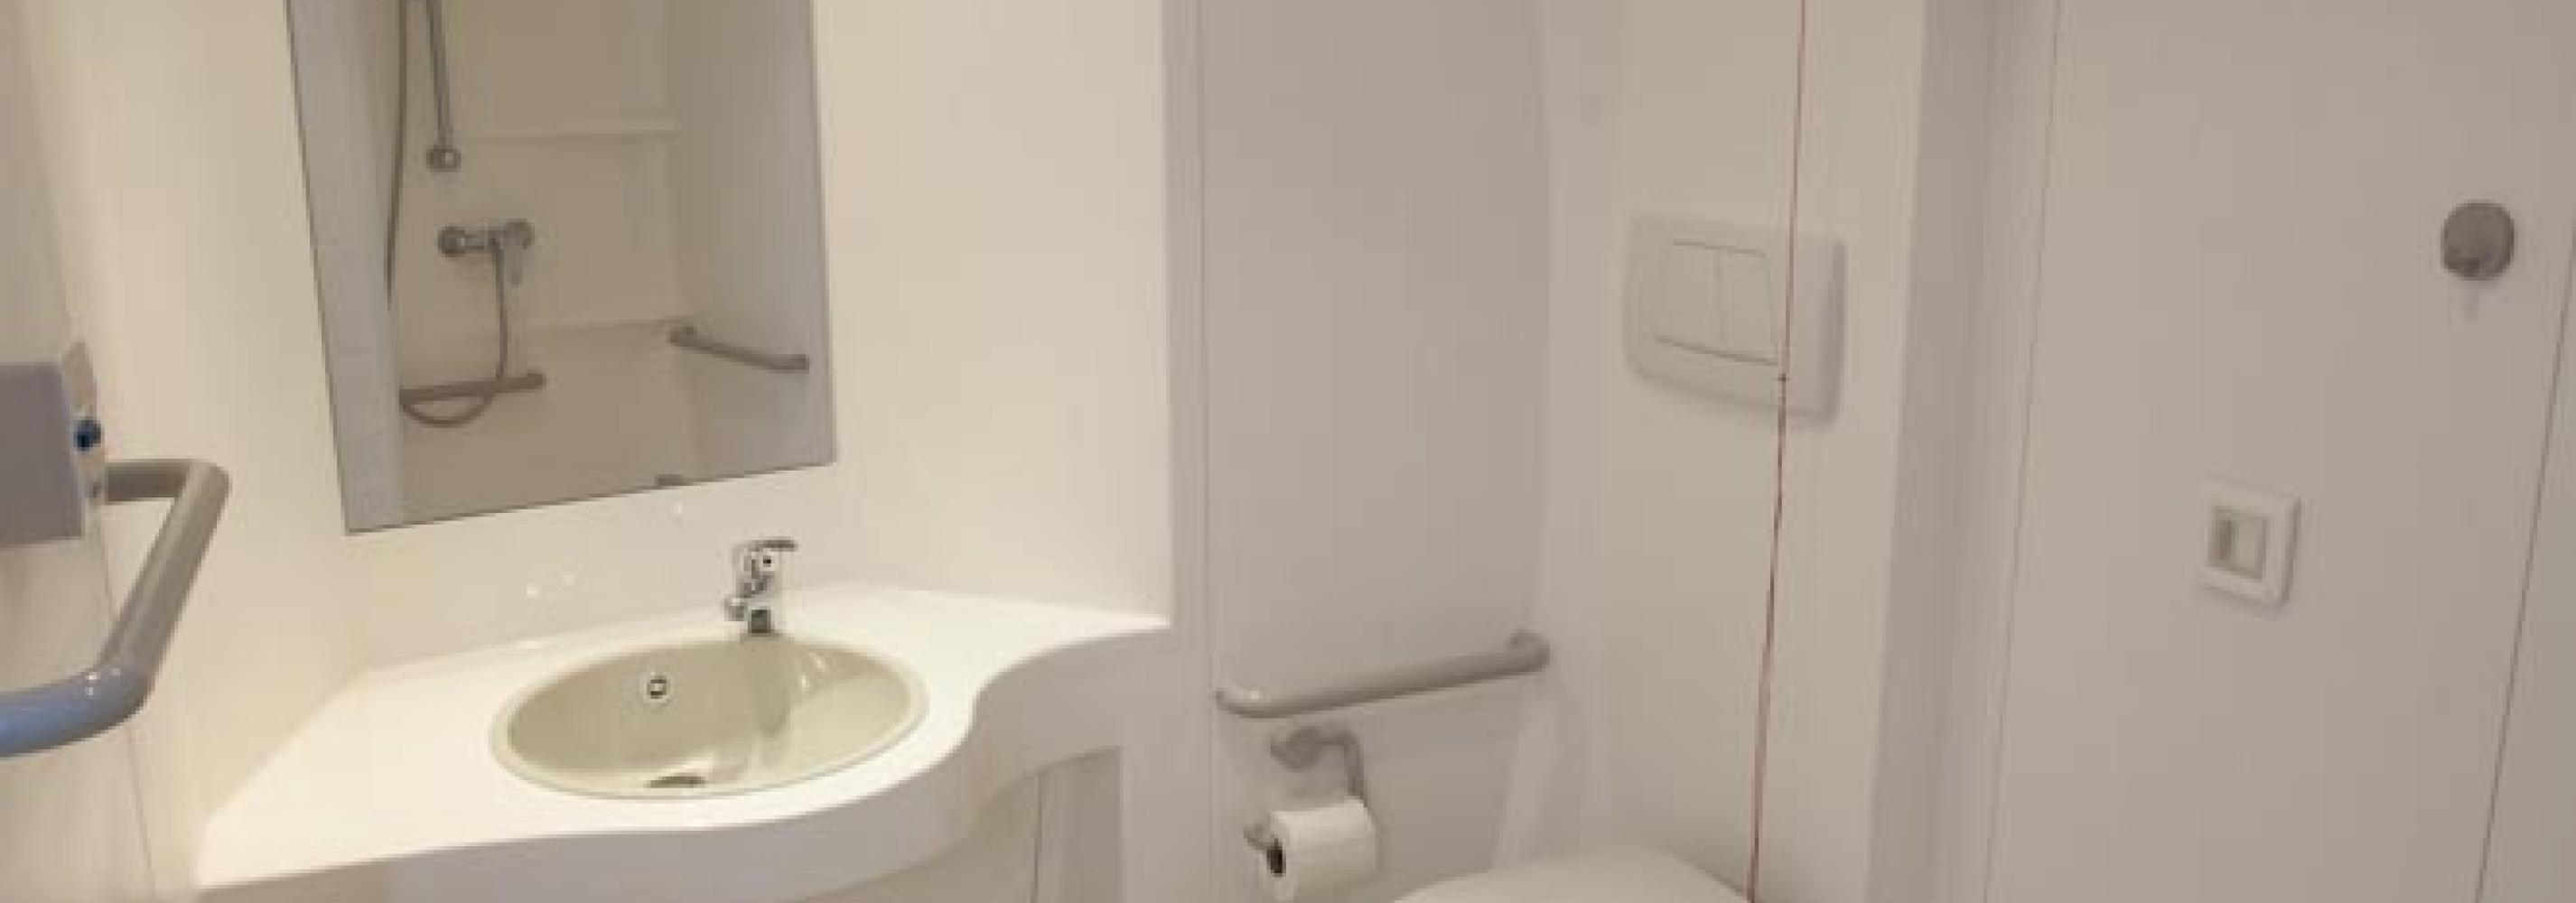 Accessible bathroom with shower, toilet, sink and mirror